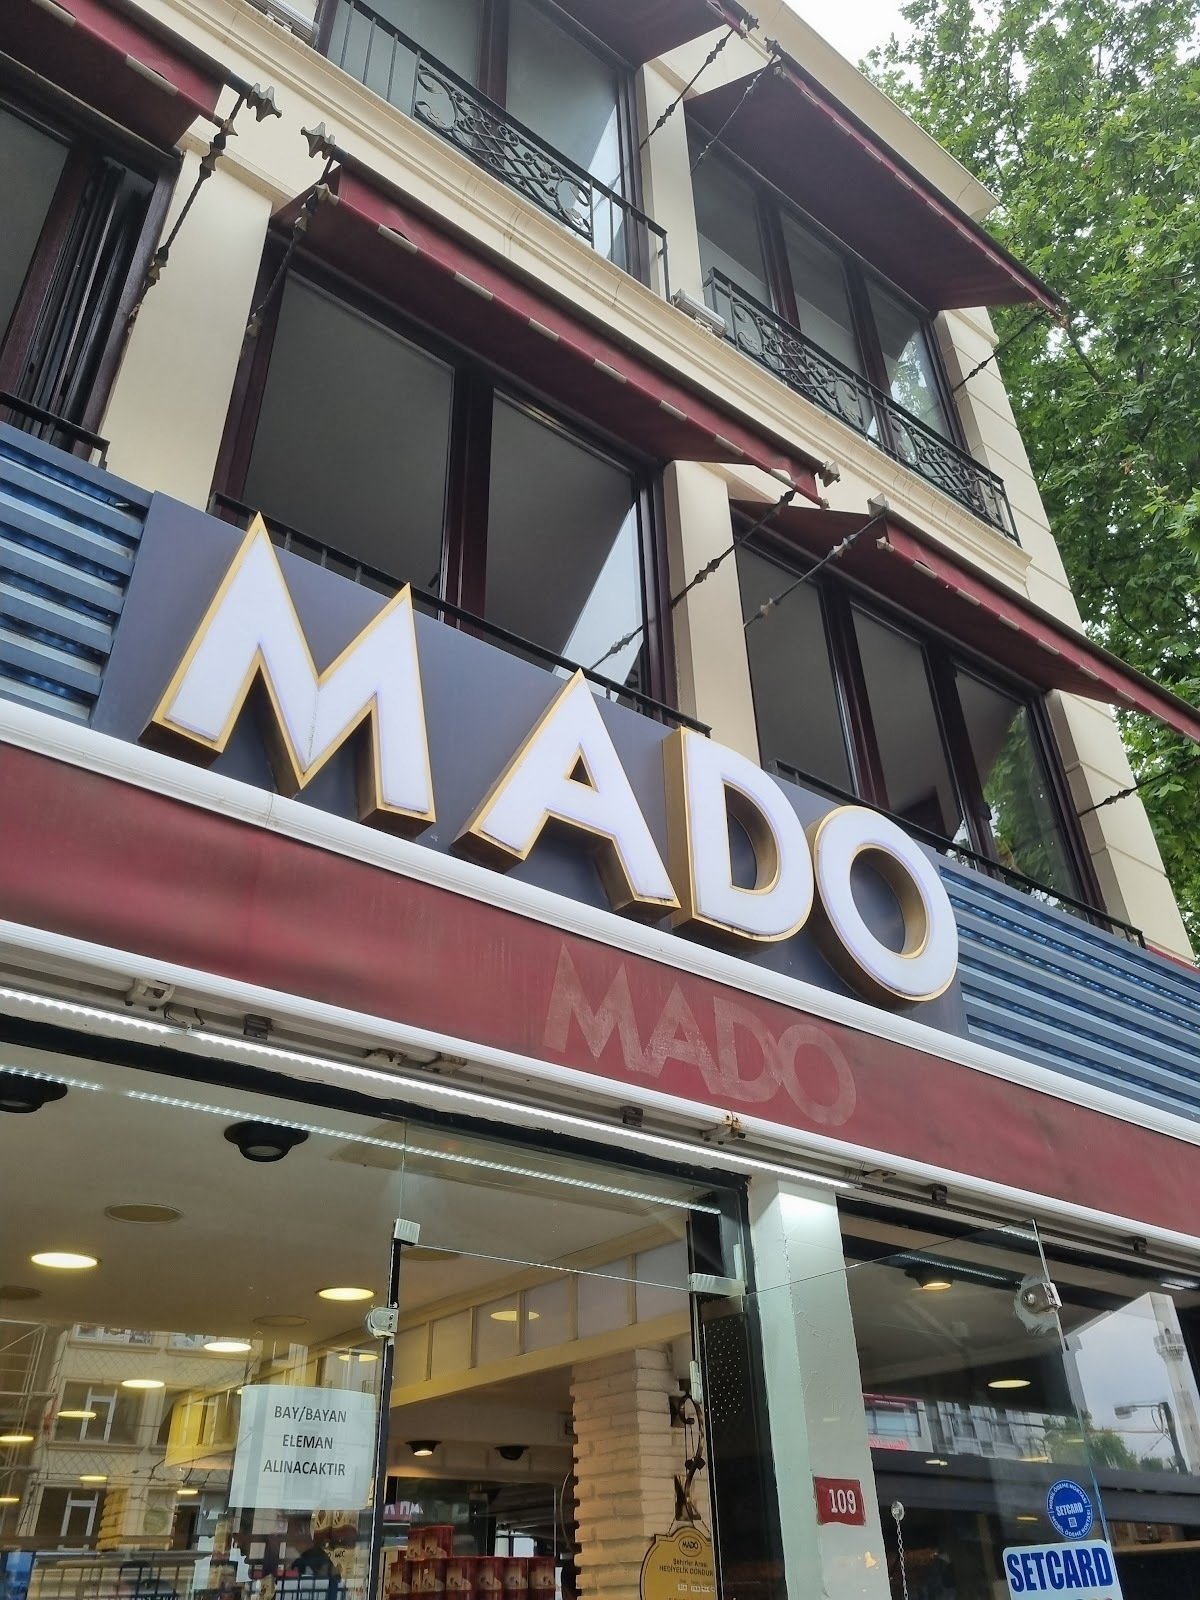 <span class="translation_missing" title="translation missing: en.meta.location_title, location_name: Mado, city: Istanbul">Location Title</span>